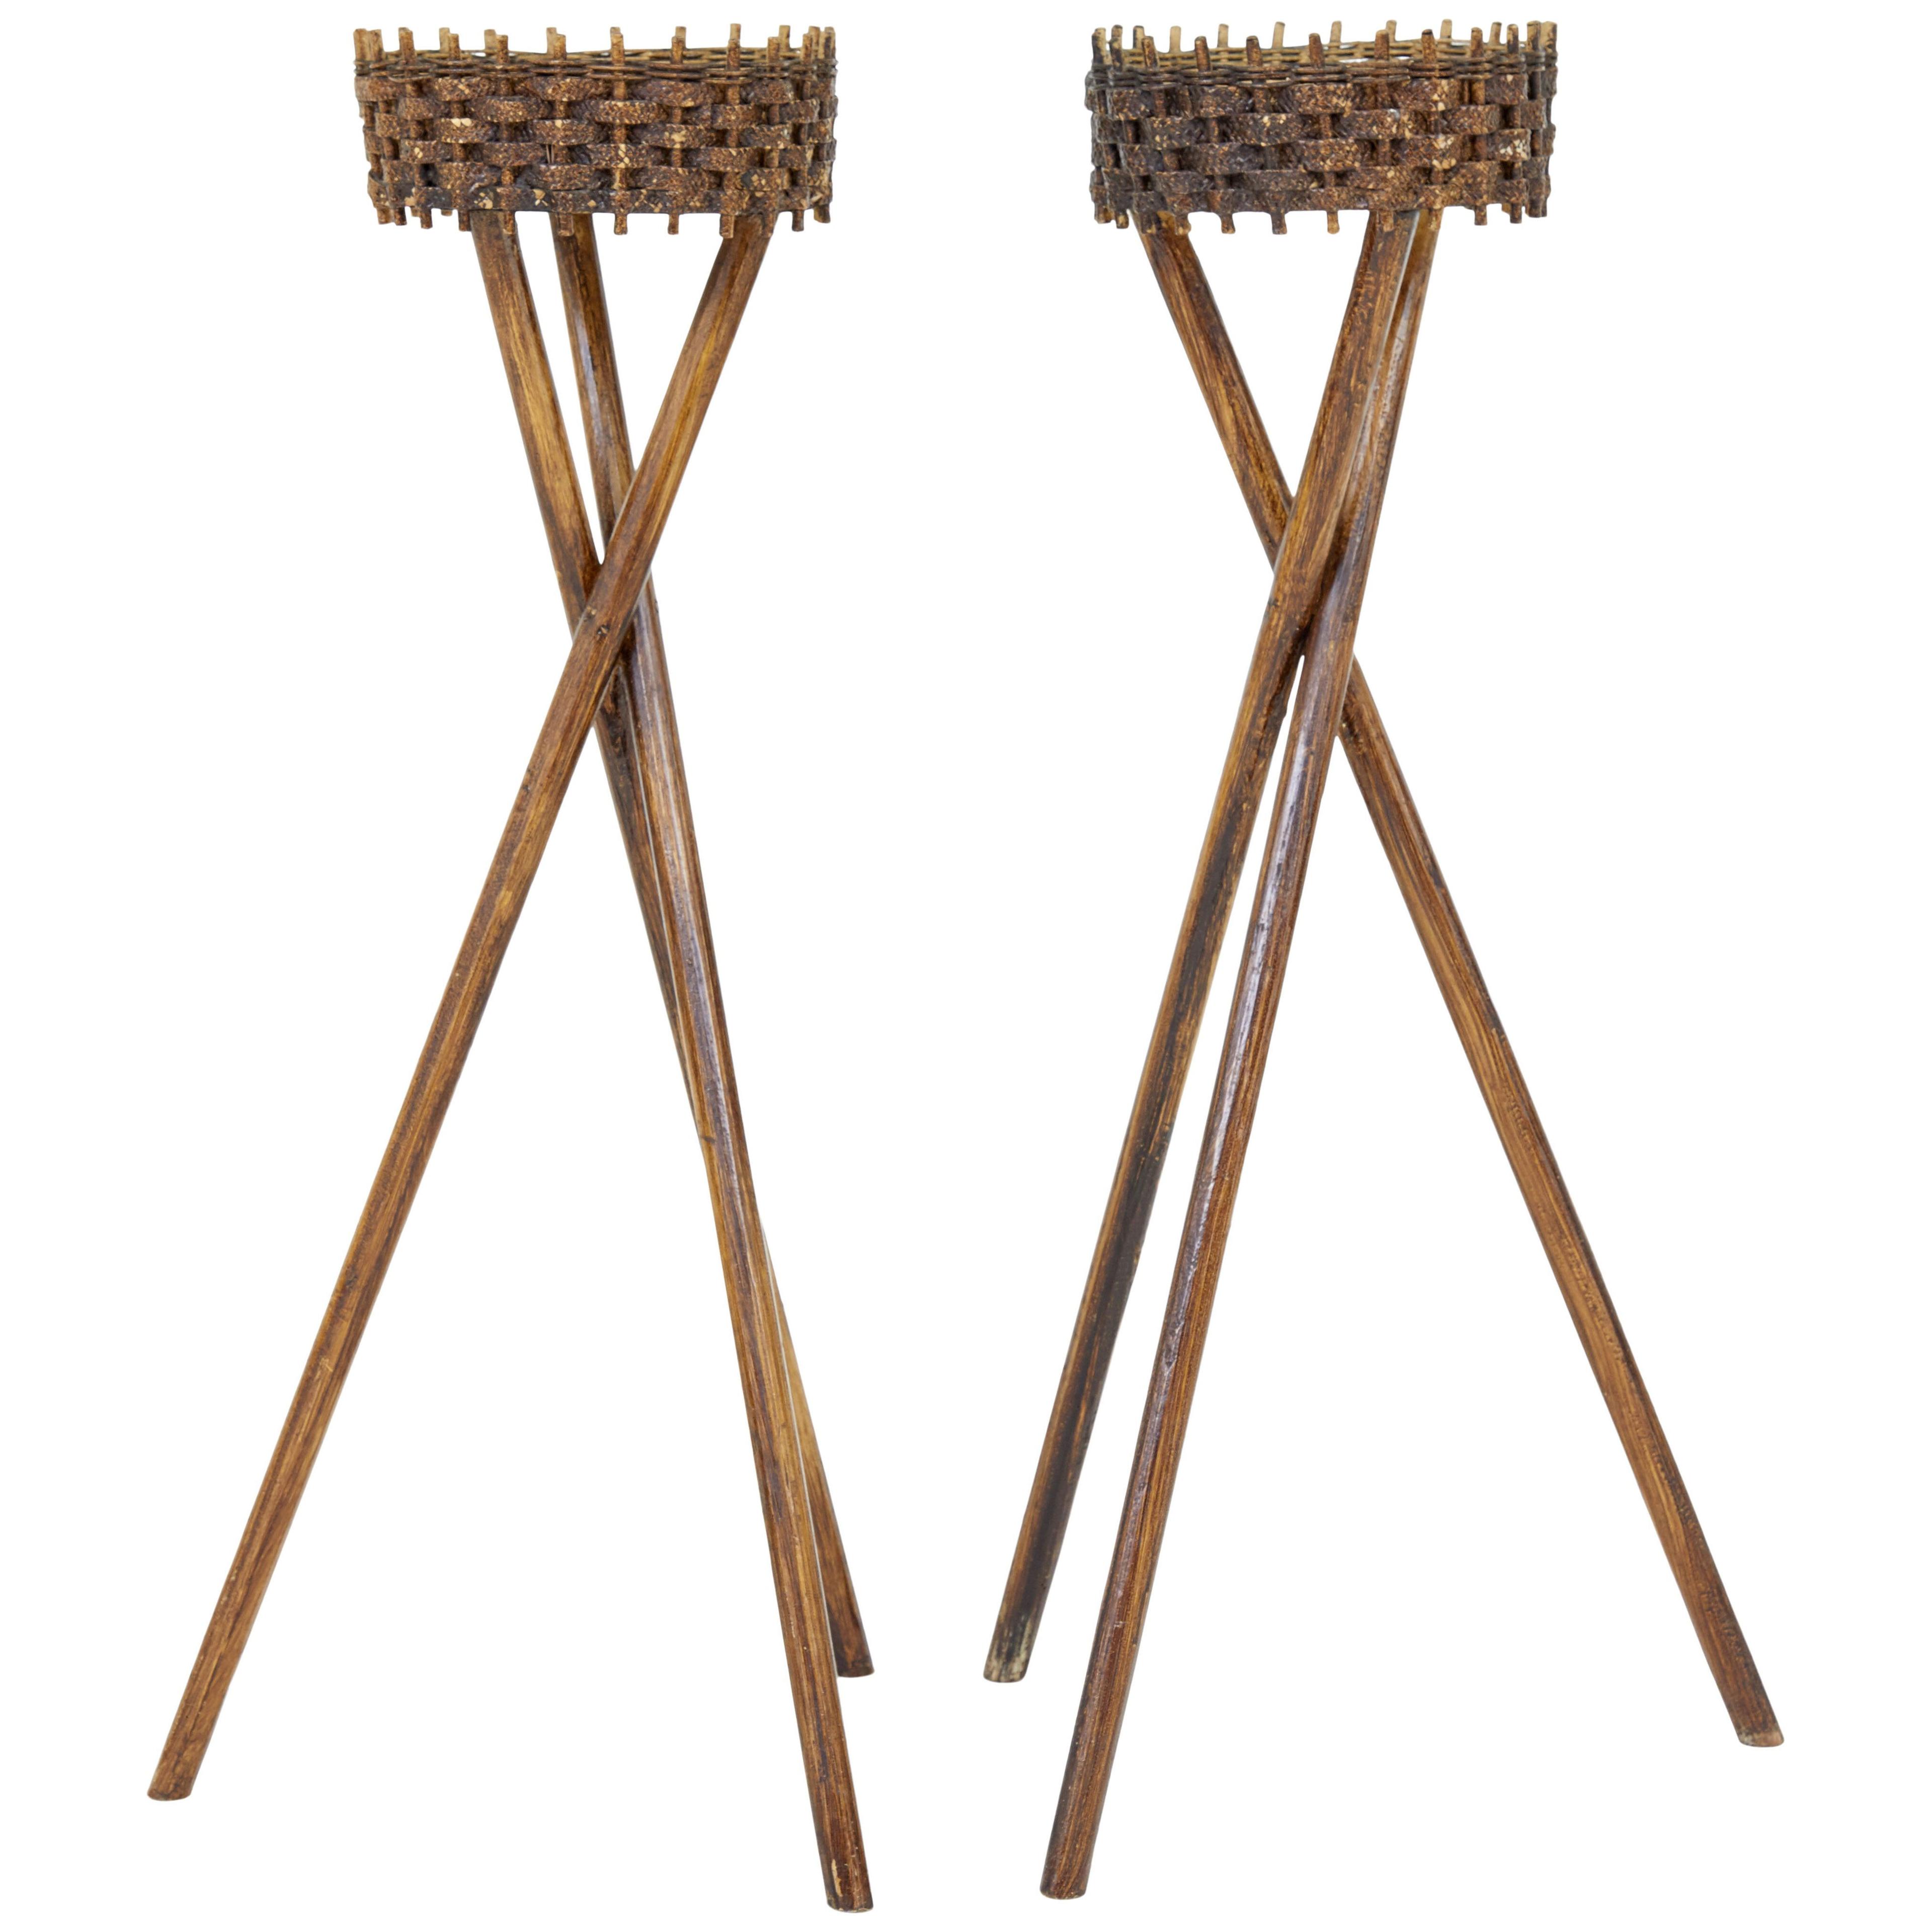 PAIR OF MID 20TH CENTURY WOVEN PLANT STANDS